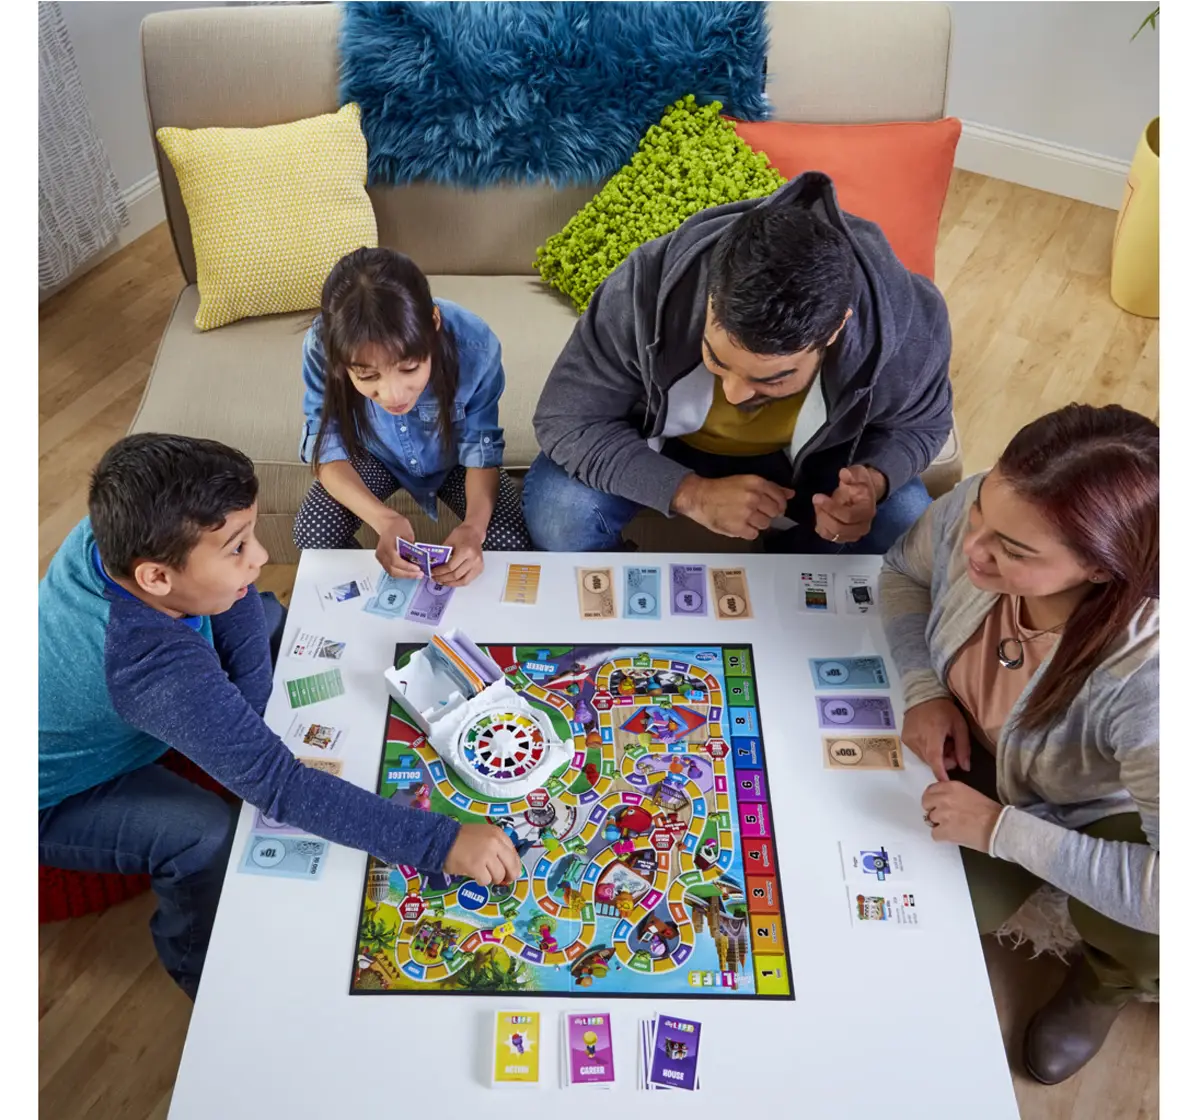 Hasbro Gaming The Game of Life Family Board Game 2 to 4 Players, 8Y+